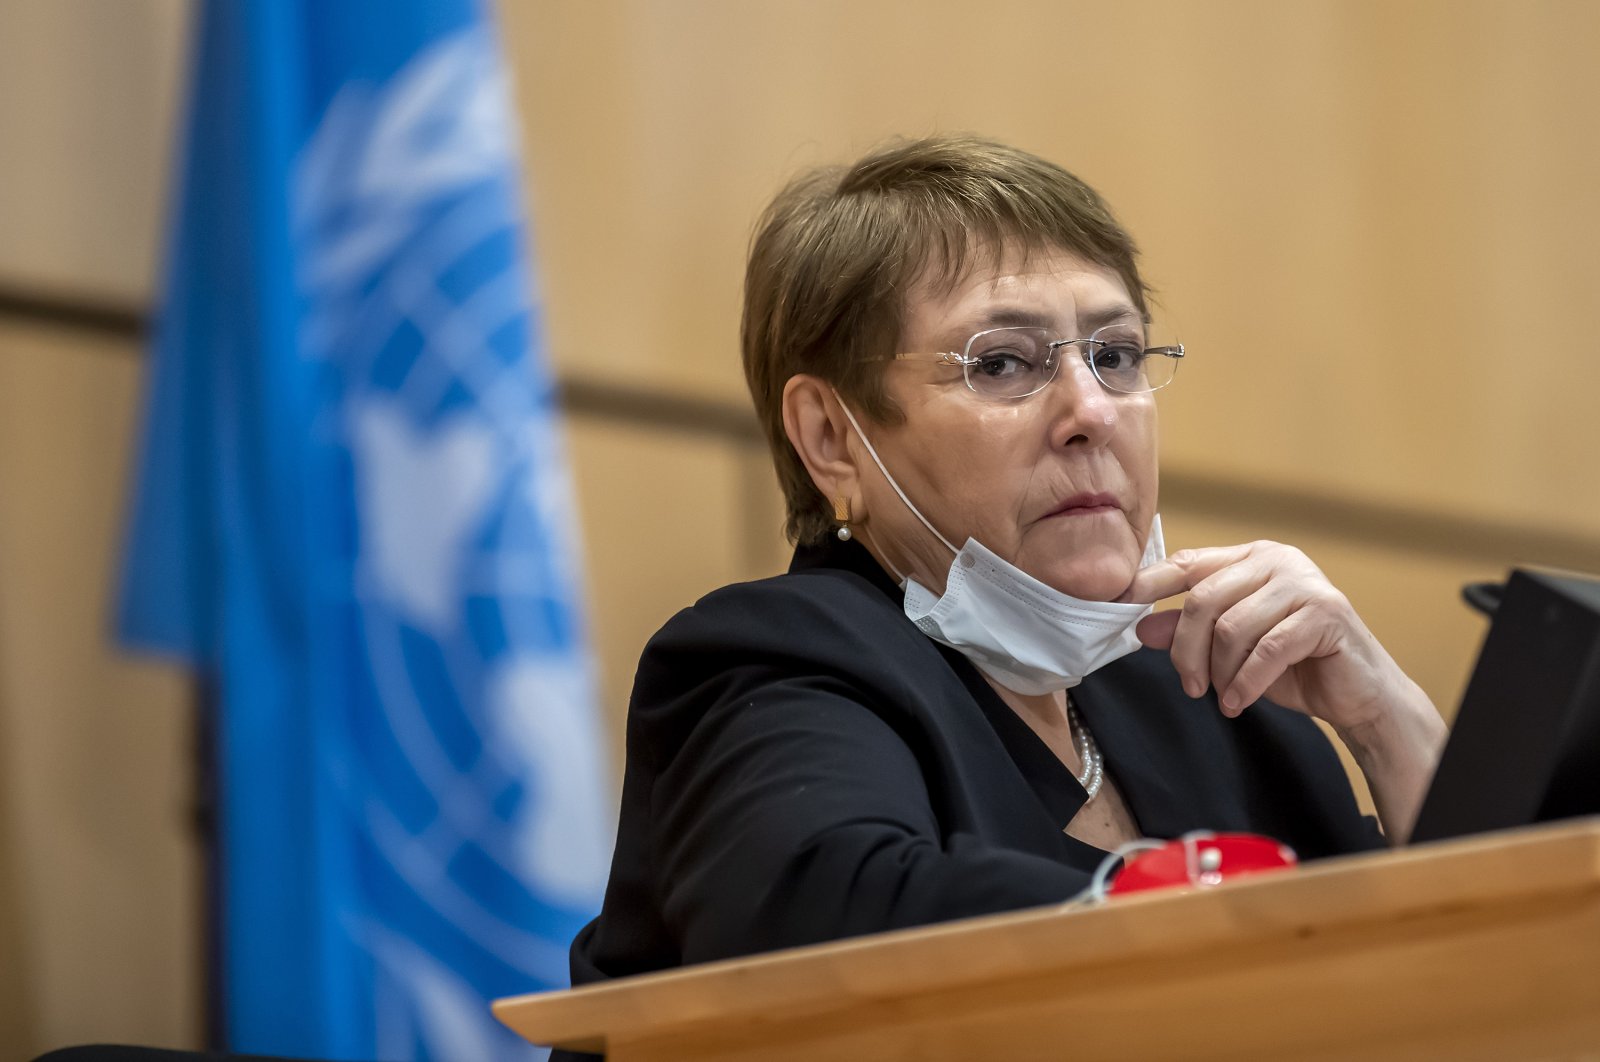 High Commissioner for Human Rights Michelle Bachelet attends a meeting of the Human Rights Council of the United Nations in Geneva, Switzerland, June 17, 2020. (AP Photo)